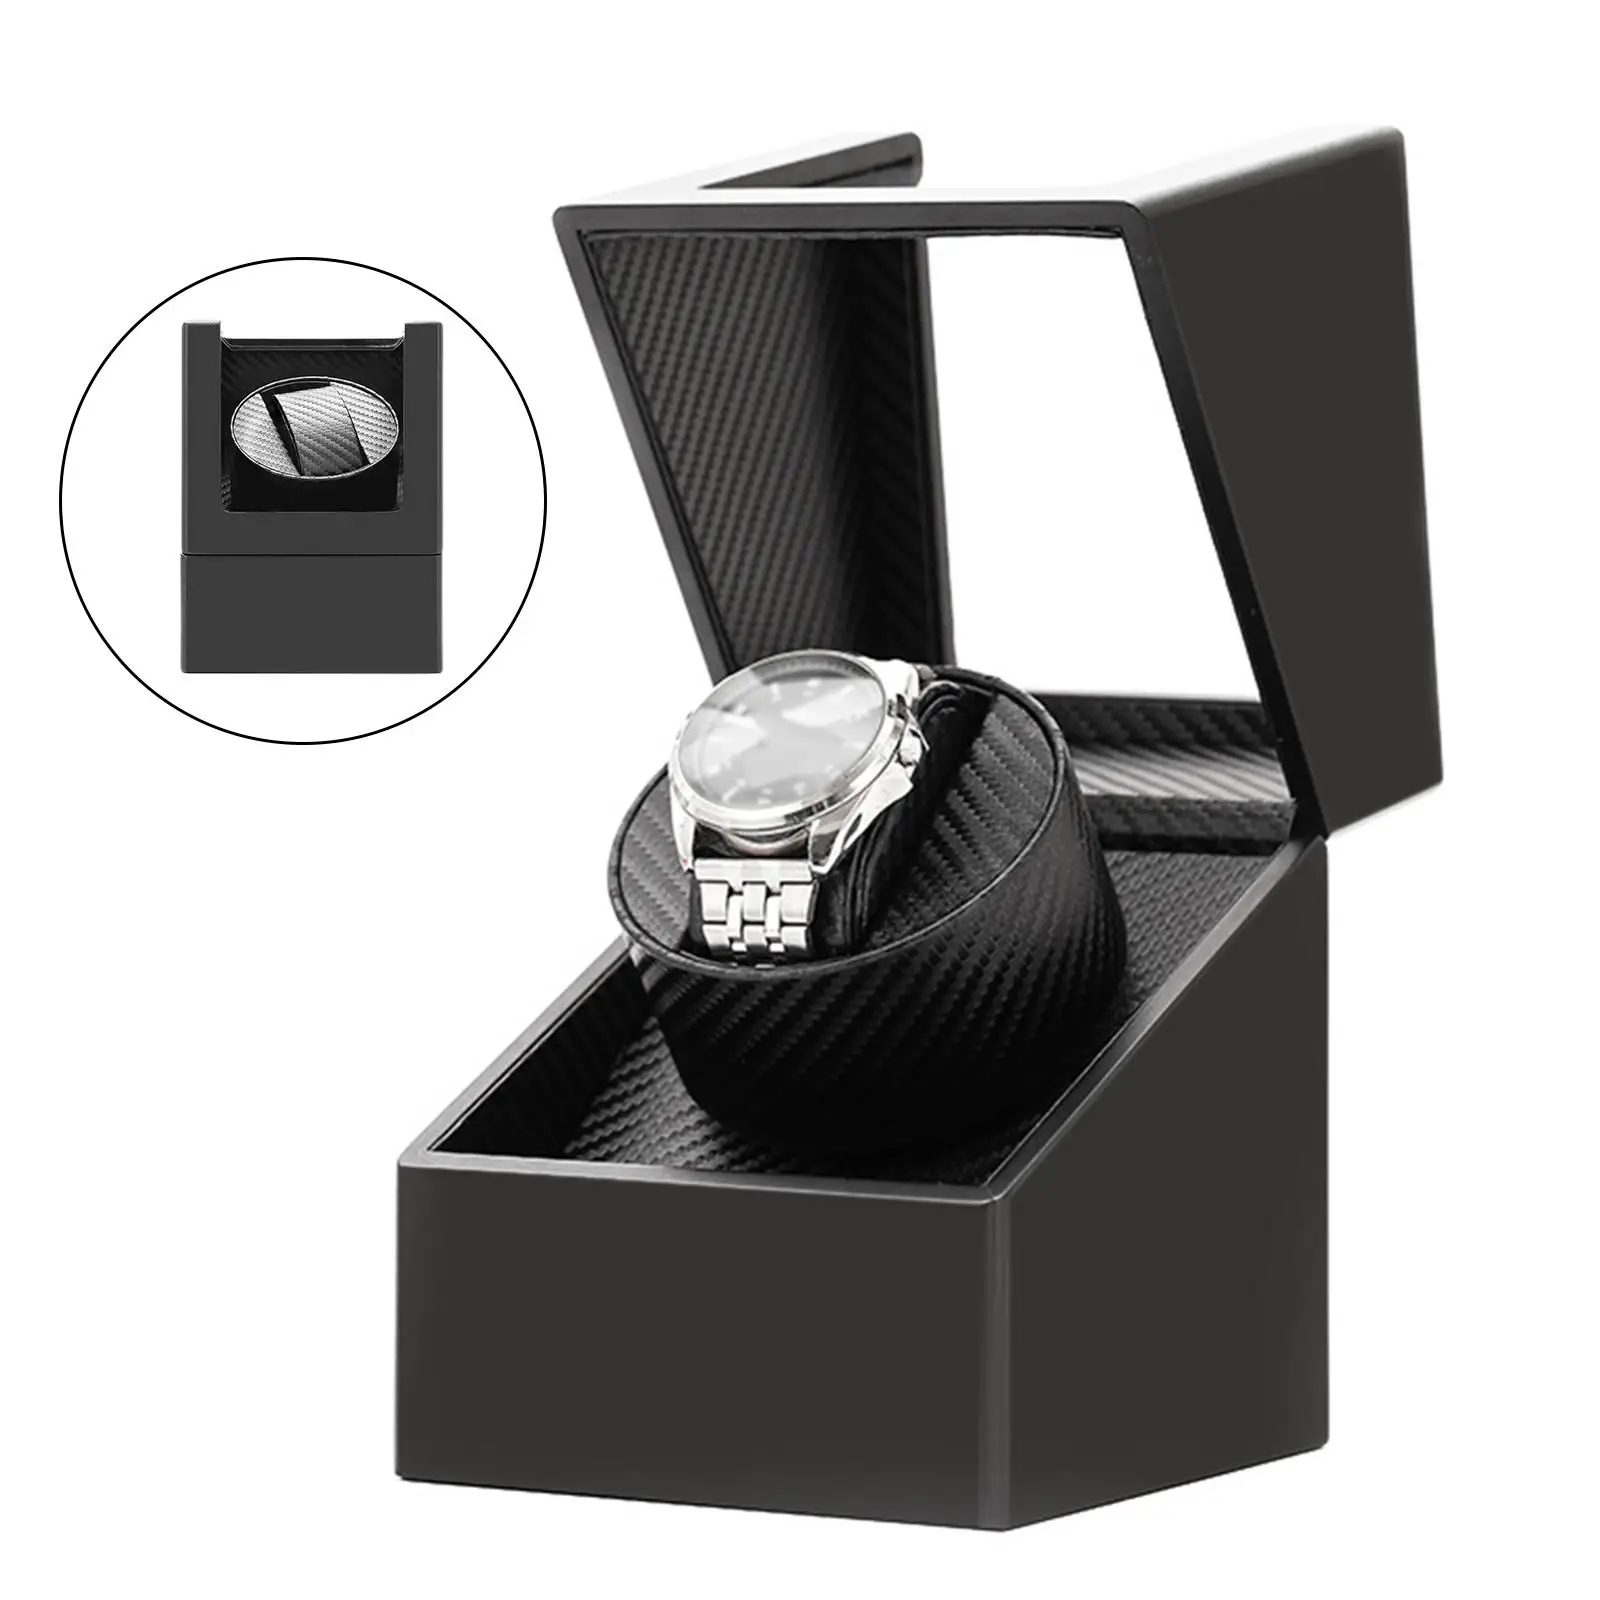 Automatic Single Watch Winder with View Window Winding Battery Powered Flexible s Storage Case for Men and Women Watches